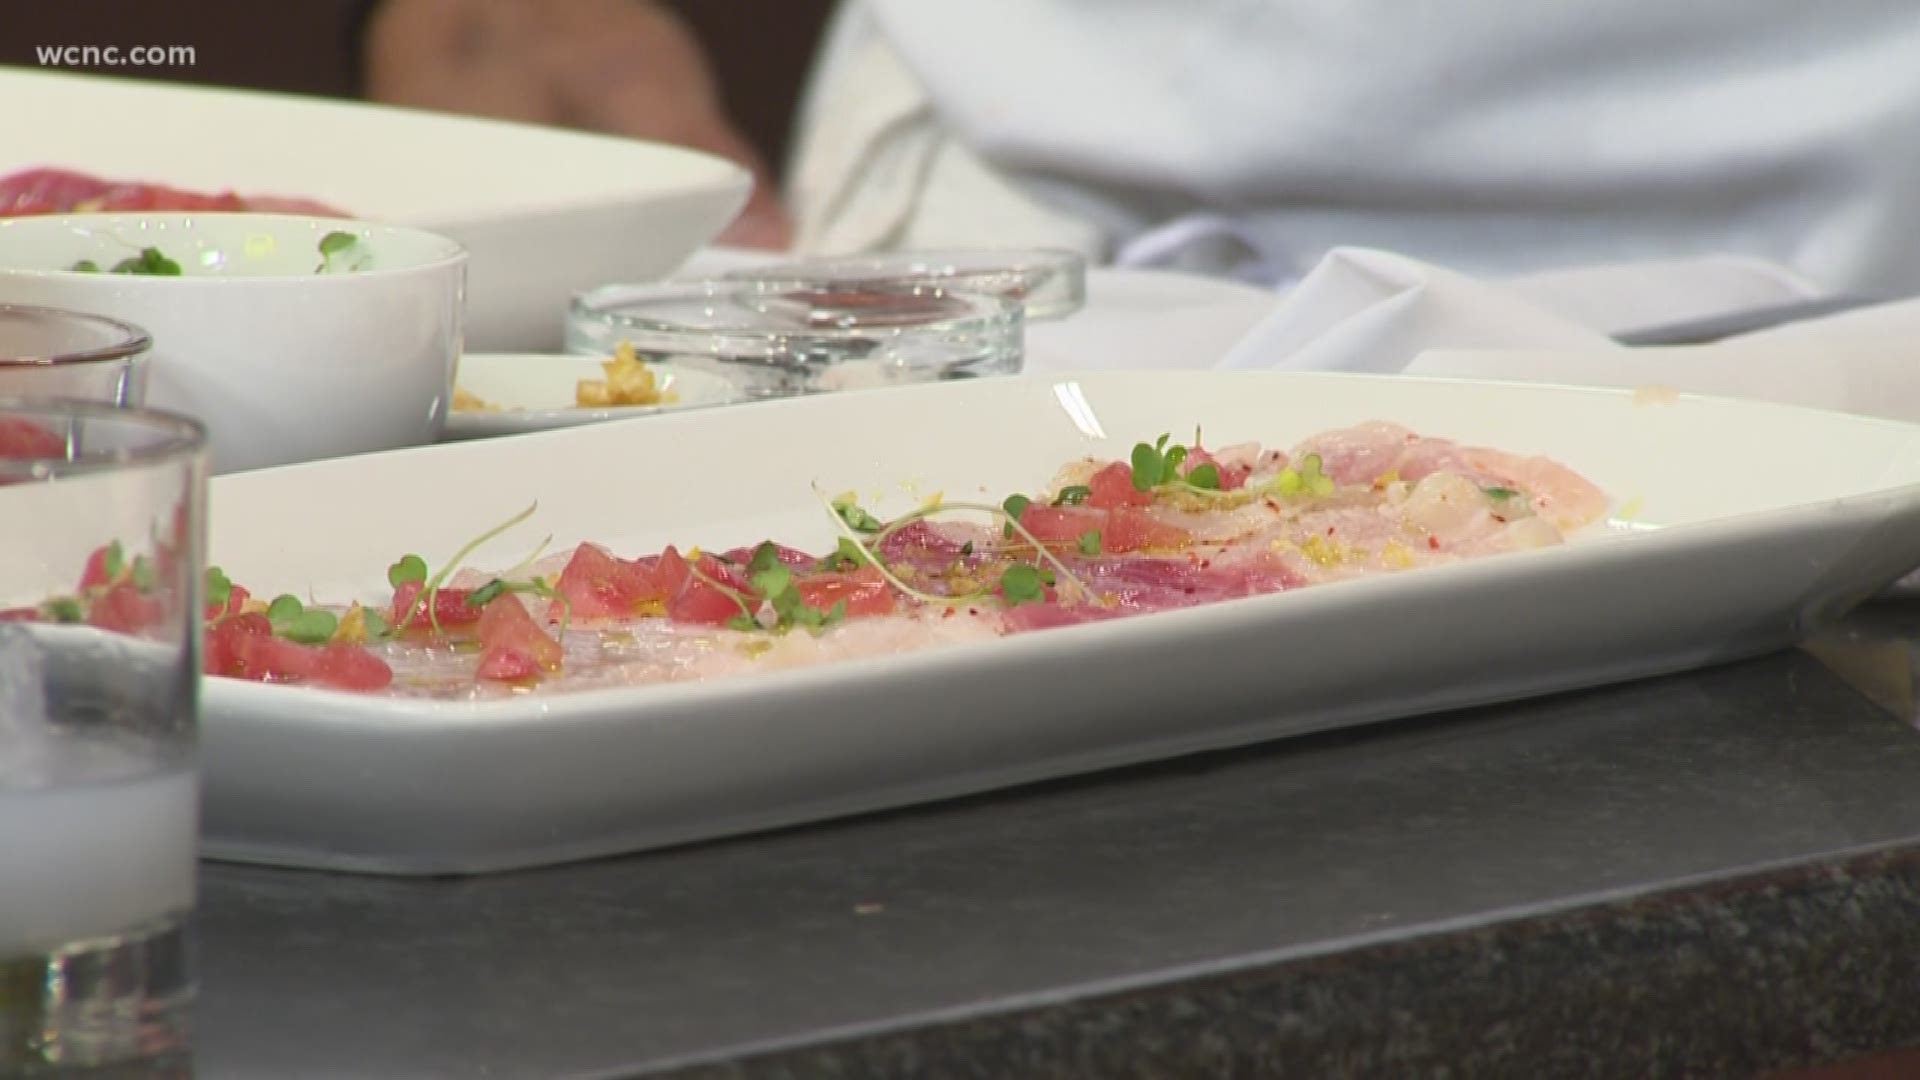 Stratos Lambos from Ilios Noche shows us how to make a light seafood dish that’s perfect for summer.